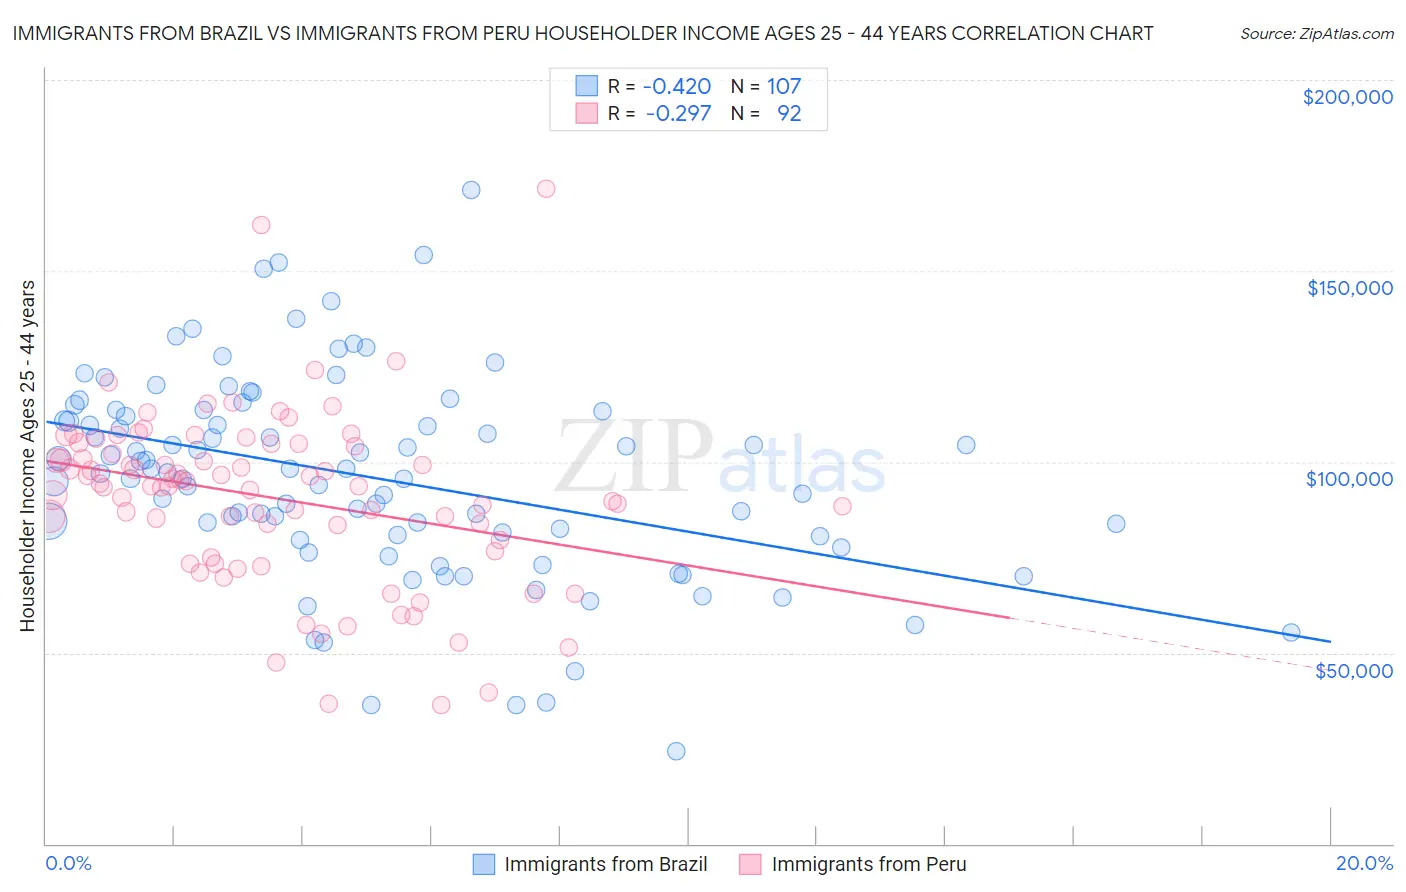 Immigrants from Brazil vs Immigrants from Peru Householder Income Ages 25 - 44 years